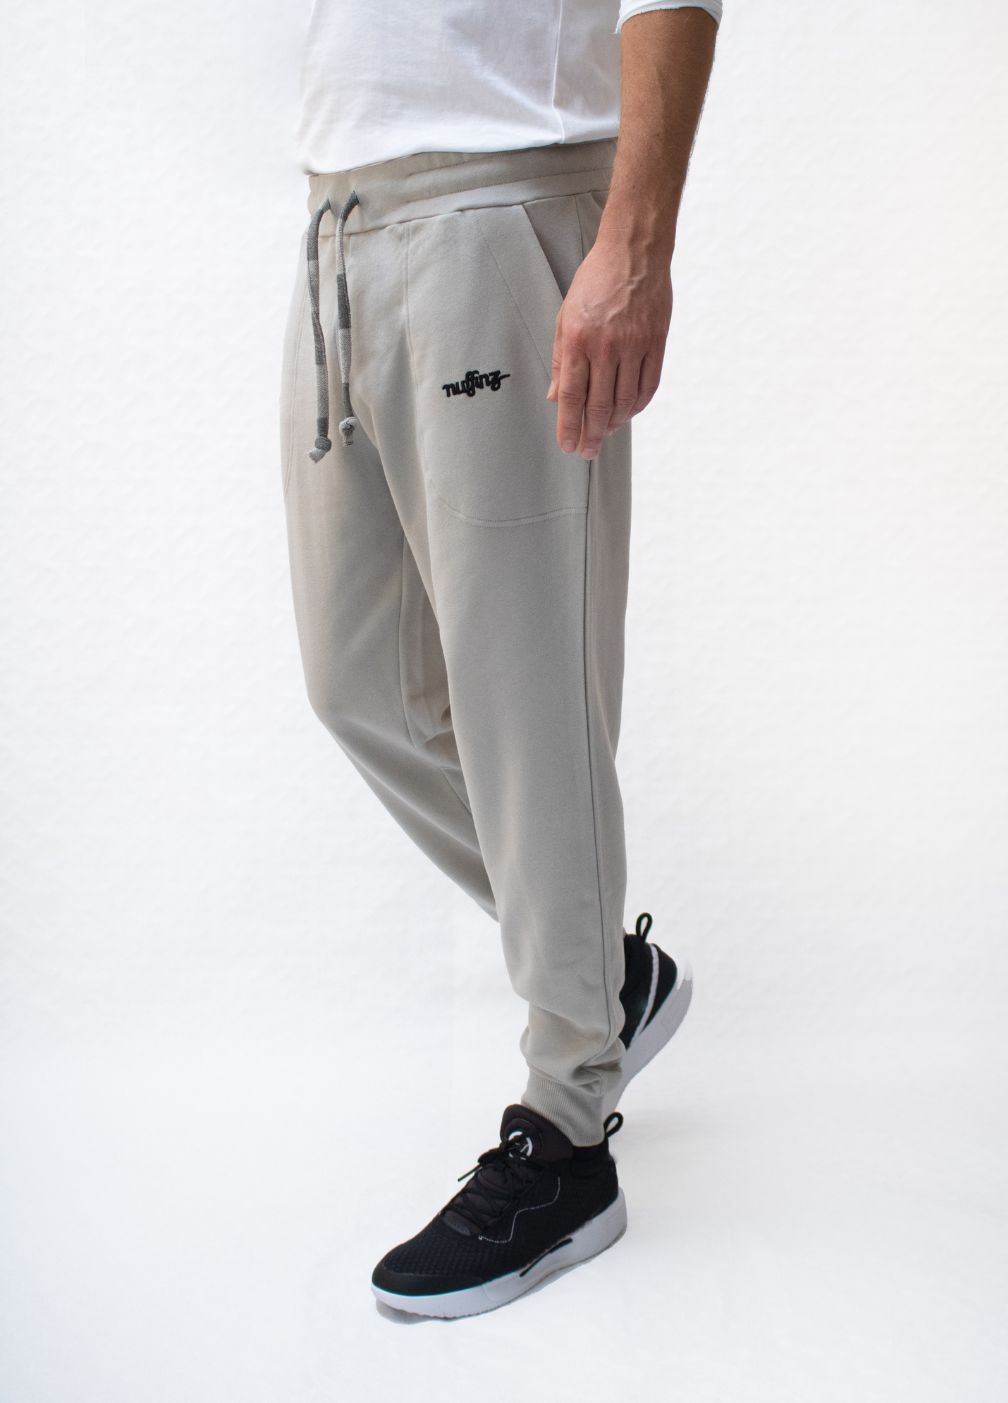 GHOST GREY SOLID PANTS